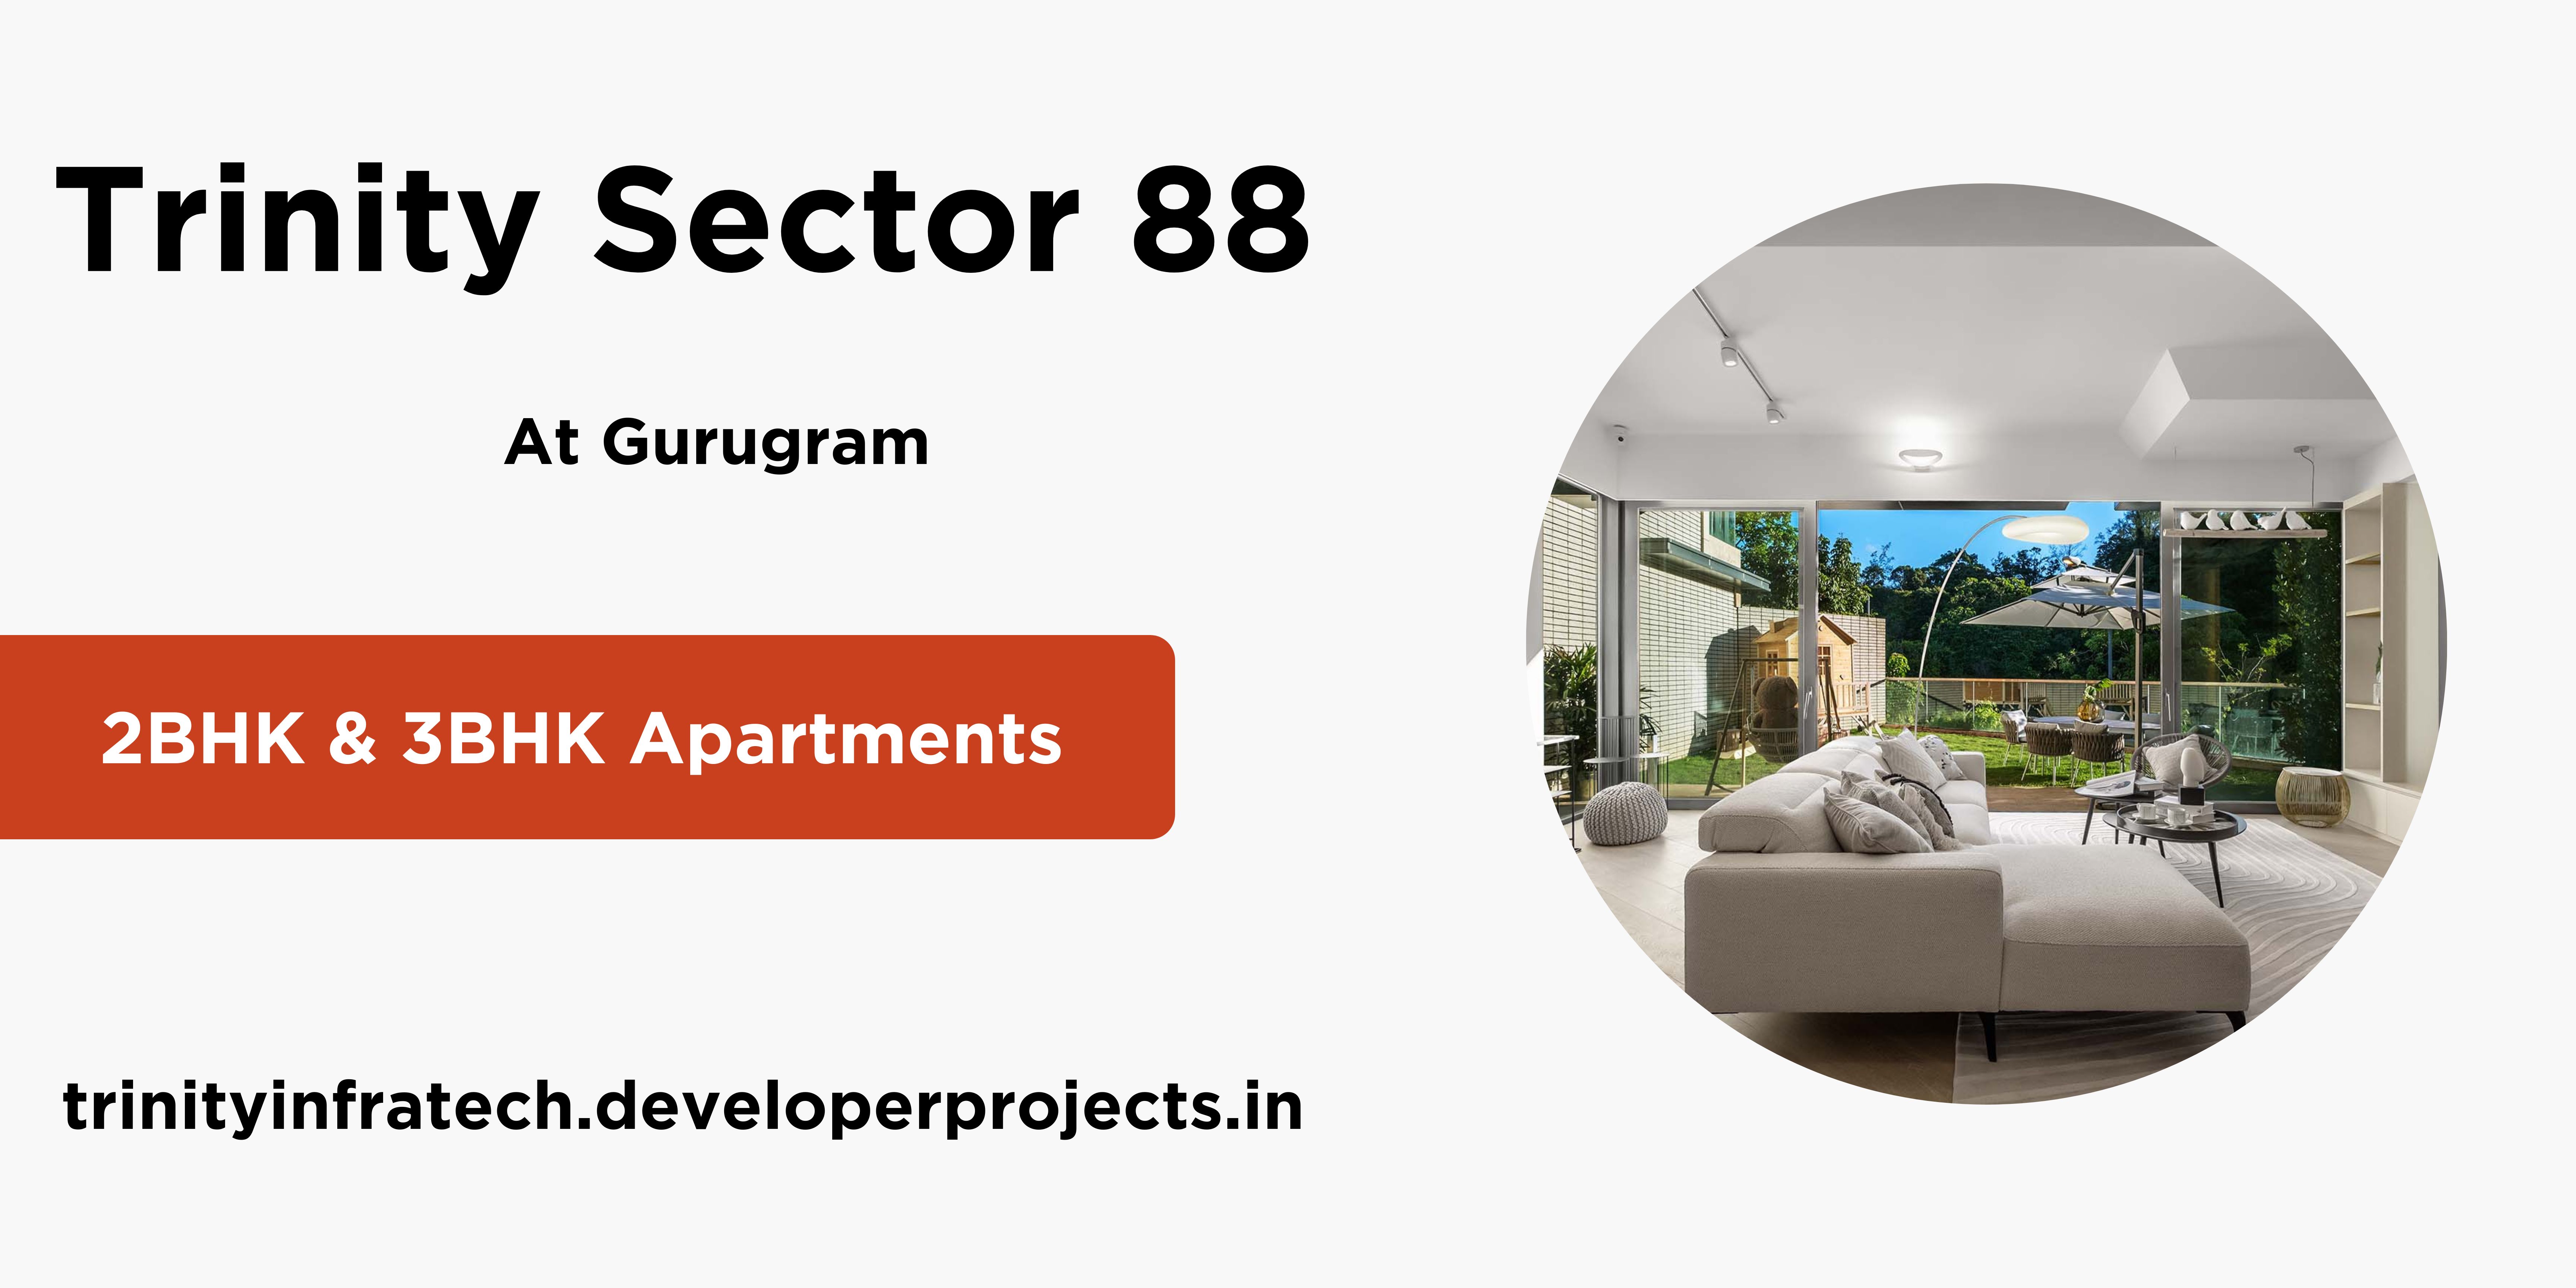 Trinity Sector 88 Gurugram -  Perfect Mix Of Convenience, Connectivity, And Luxury.